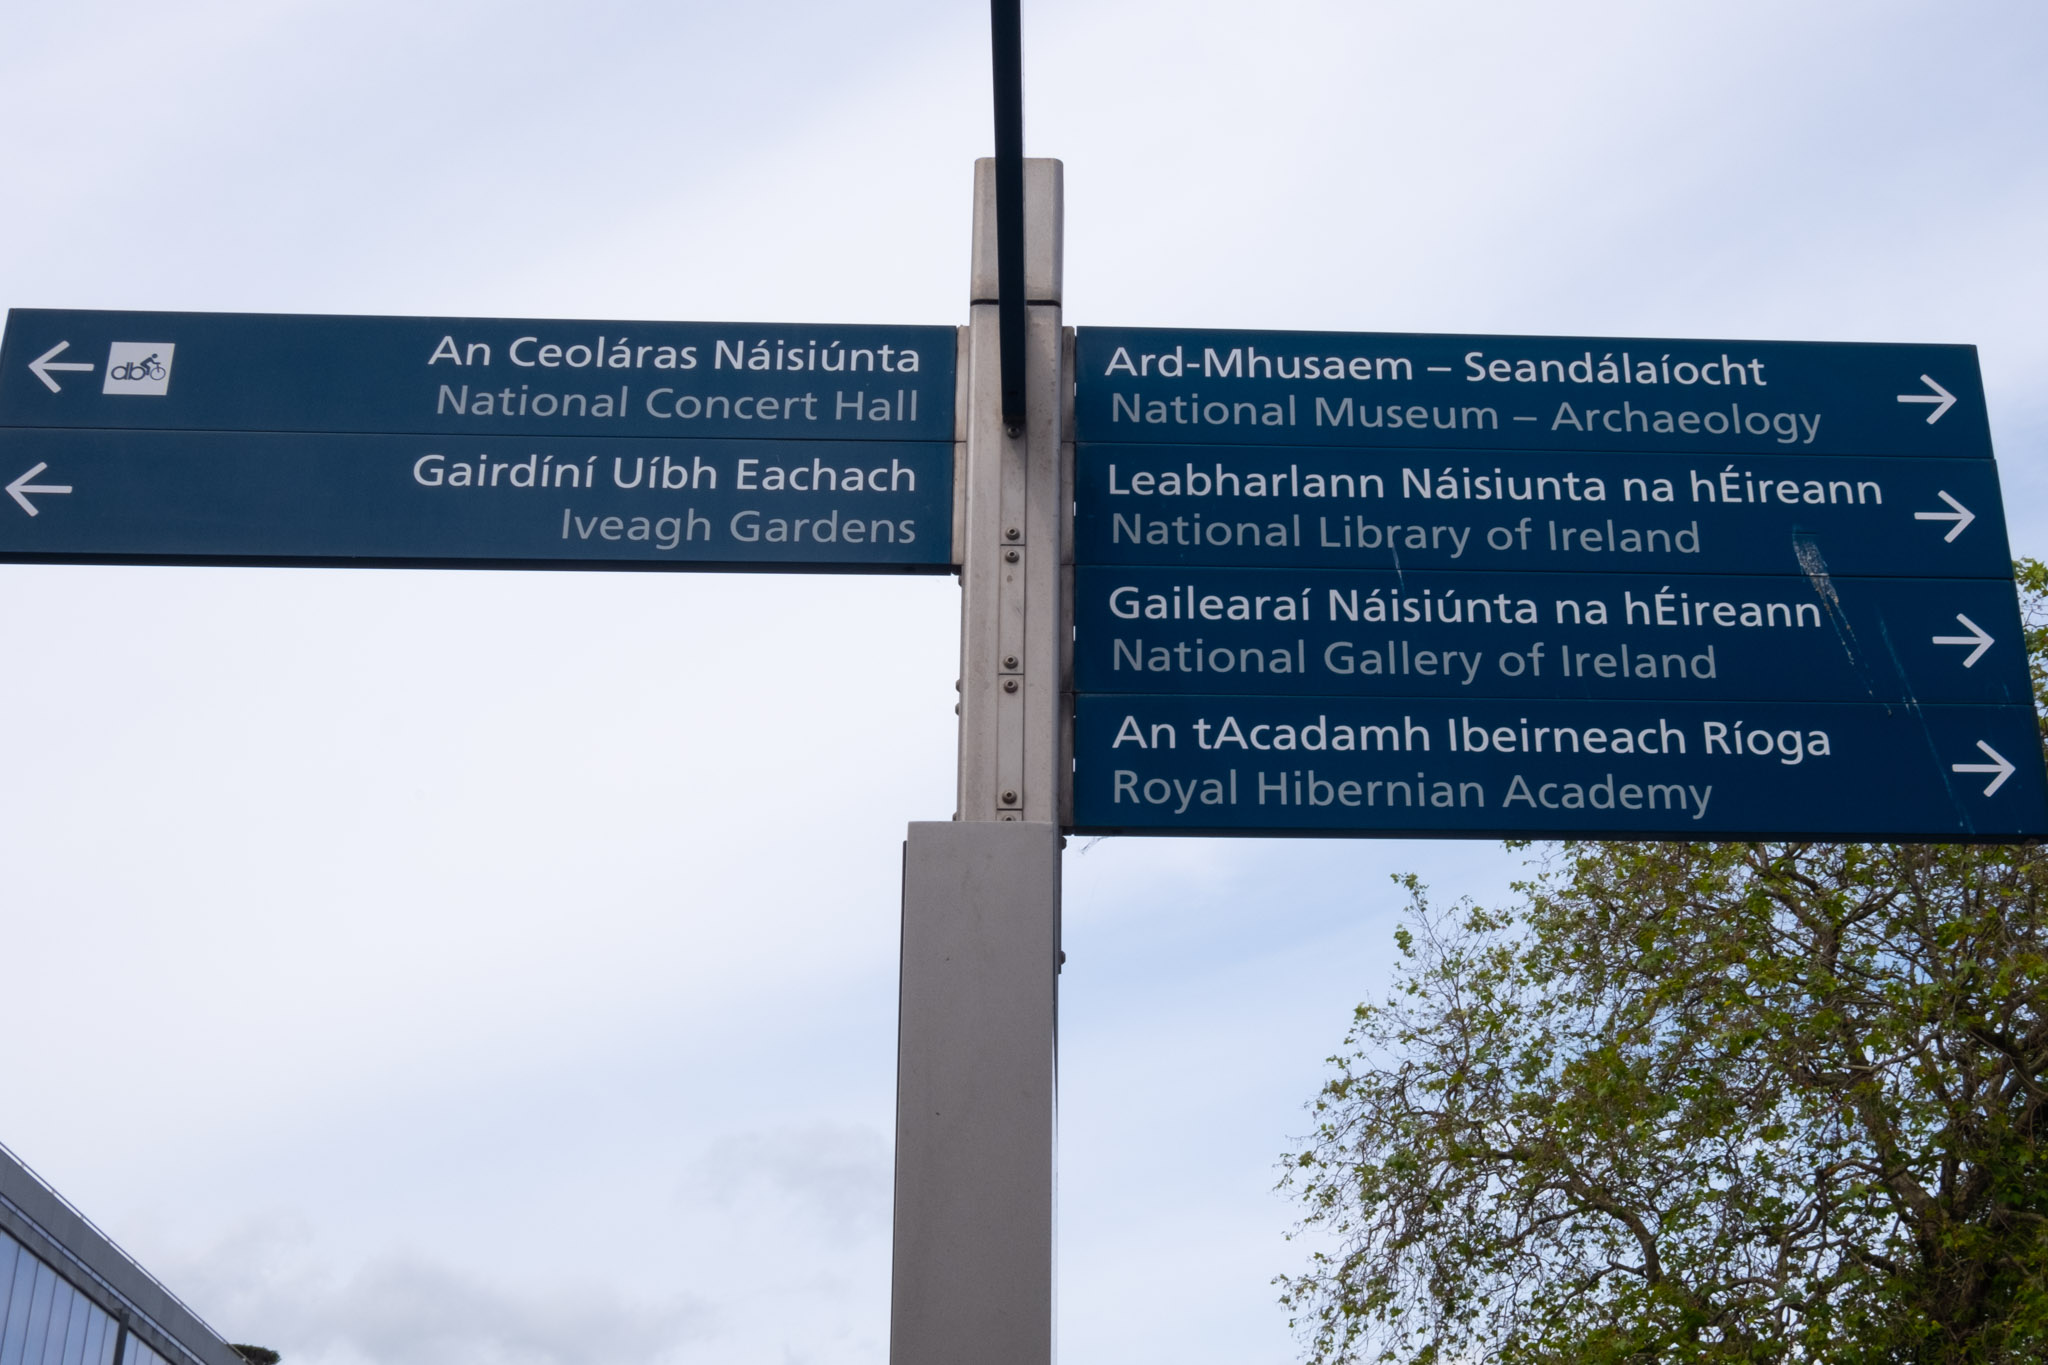 Street Sign with arrows to the National Concert Hall, Iveagh Gardens, National Museum of Archeology, National Library of Ireland, National Gallery of Ireland, and the Royal Hibernian Academy